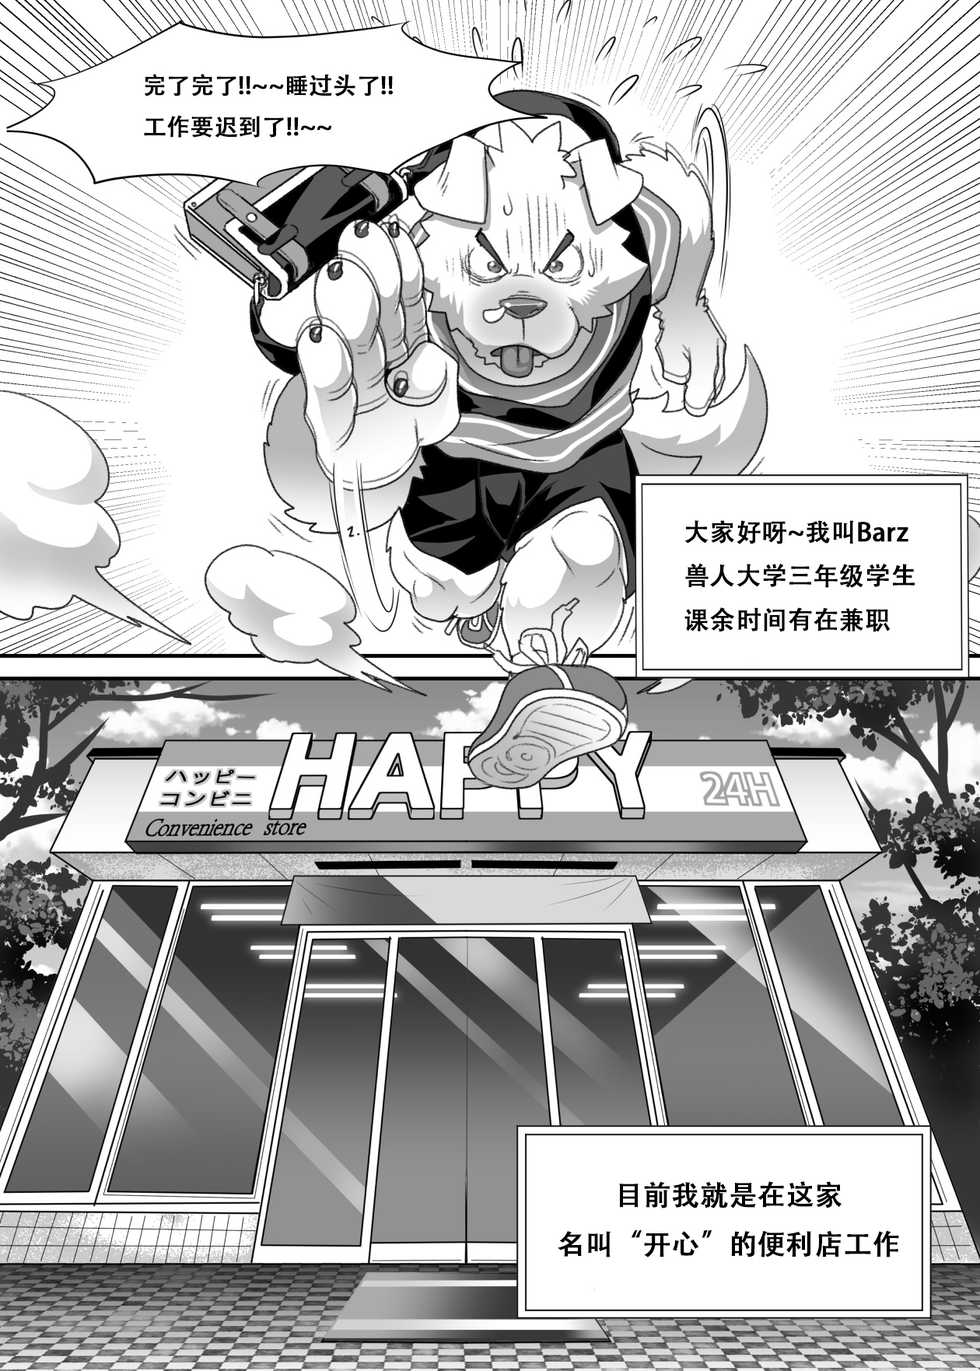 [KUMAHACHI] - "开心"便利店 ["Happy" Convenience Store] [Chinese] - Page 1